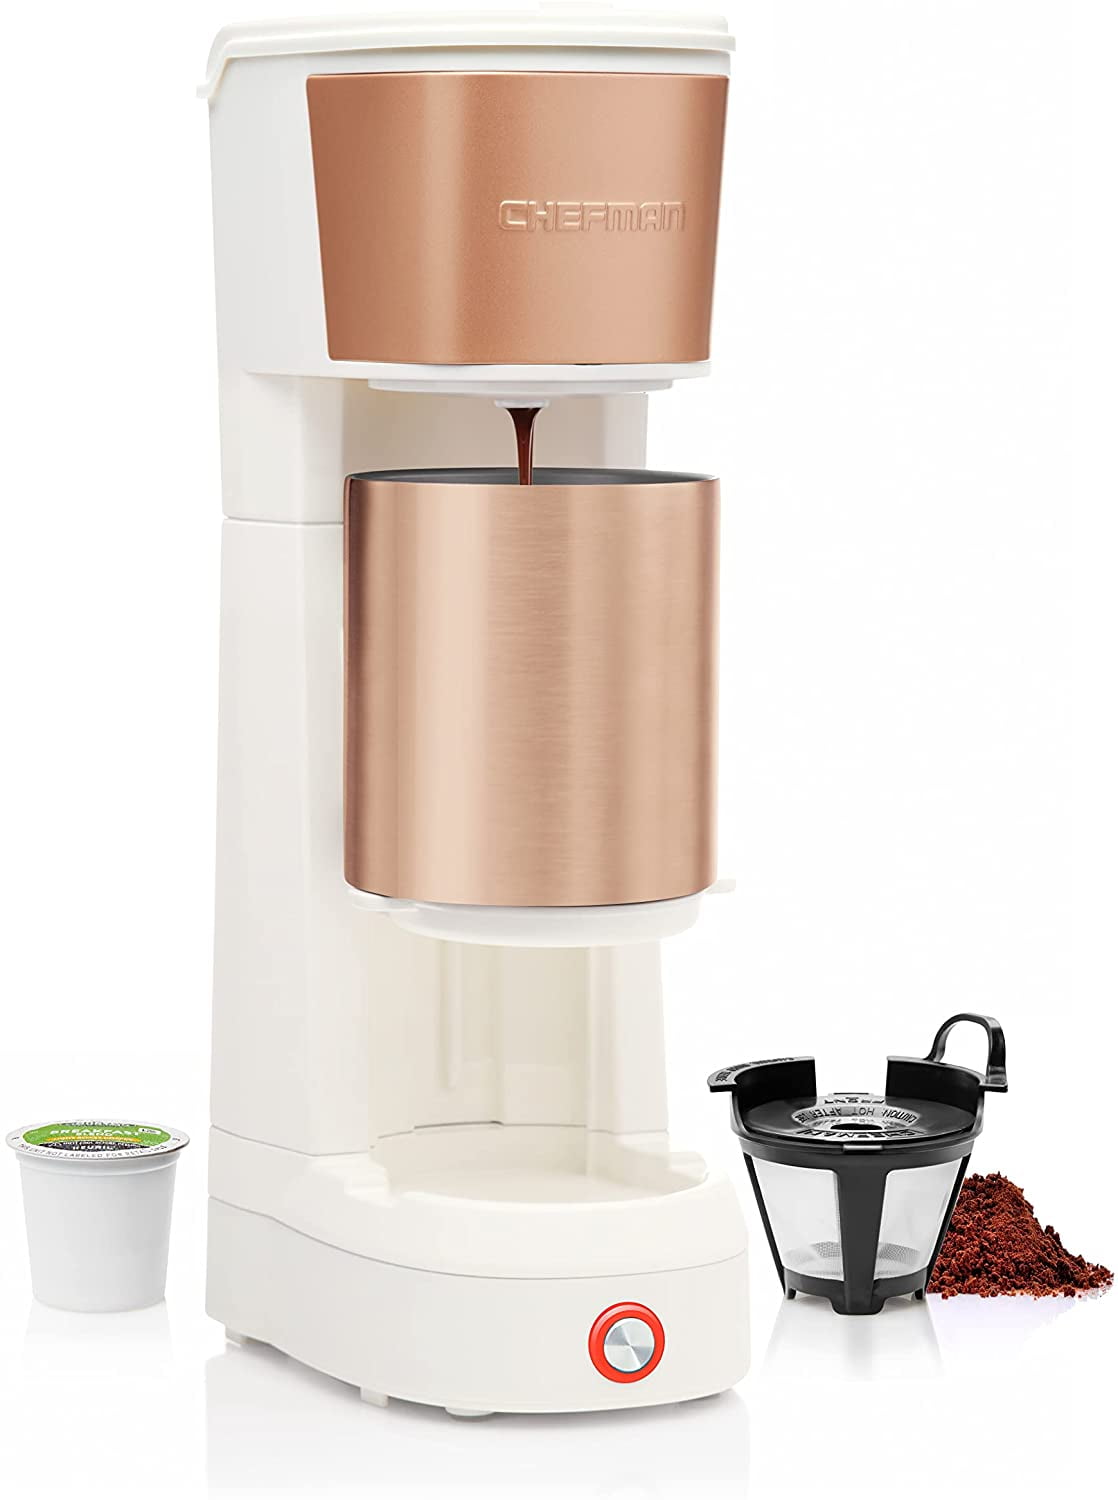 Chefman Migration InstaCoffee Max Single-Serve Brewer with Lift Black